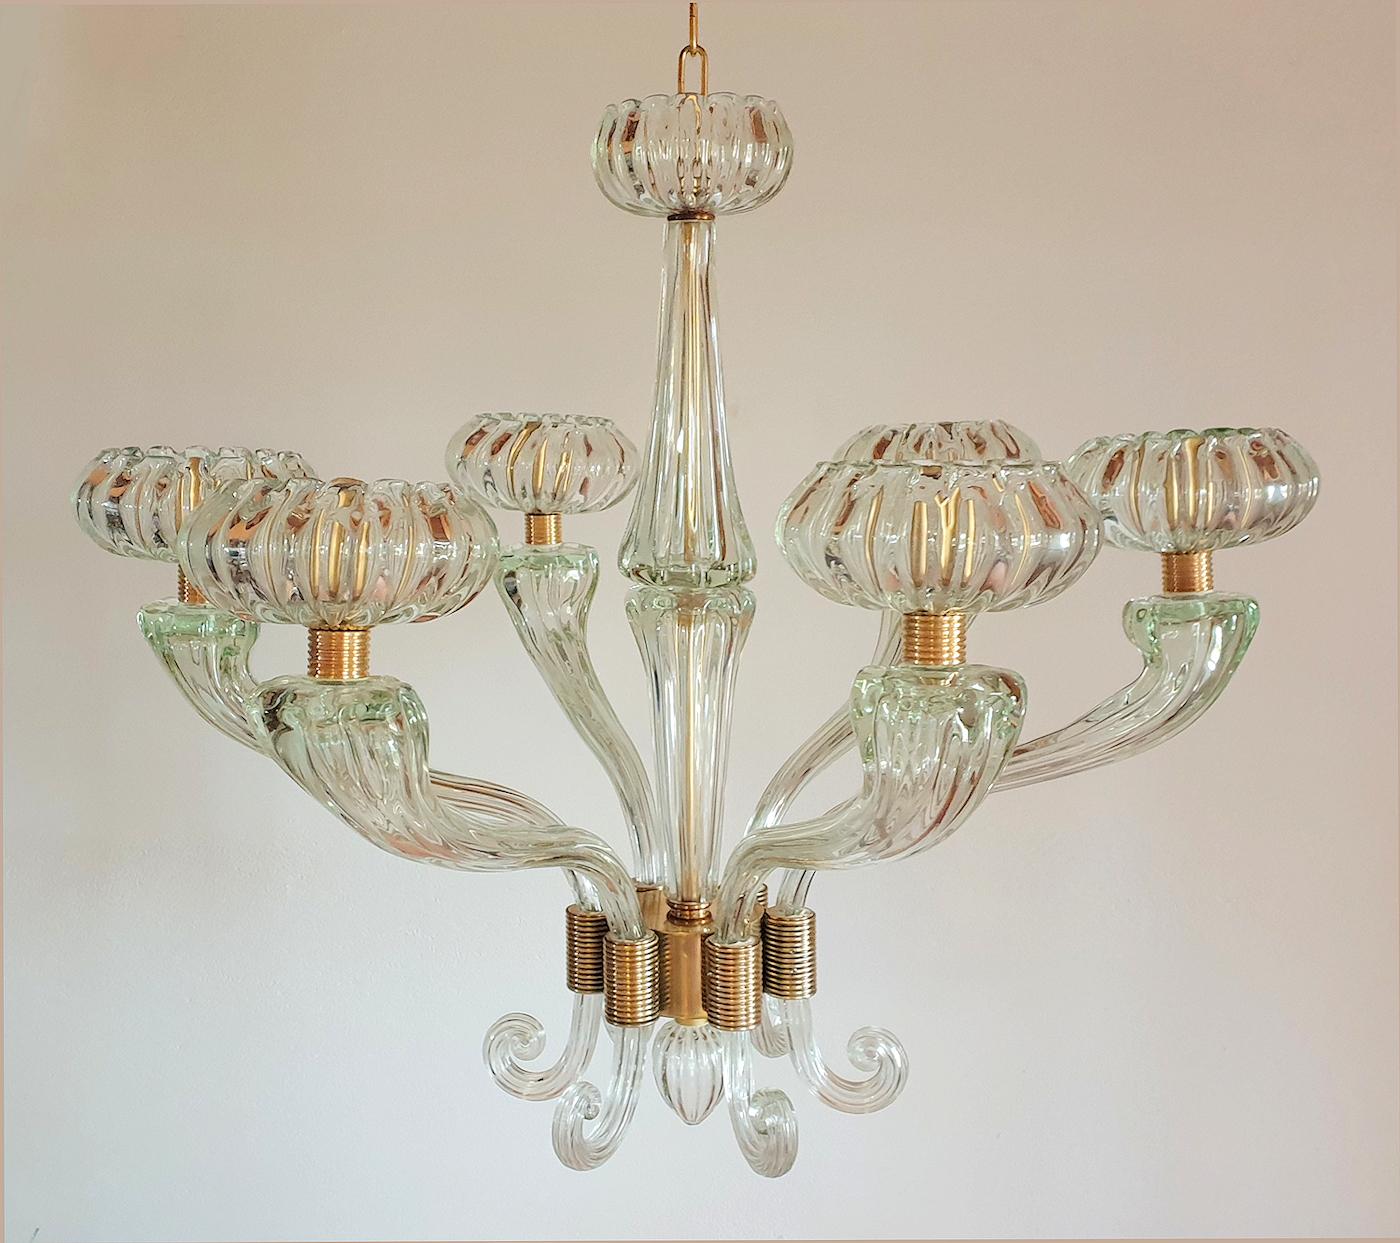 Large hand blown Murano glass chandelier, Mid-Century Modern, attributed to Barovier e Toso, 1960s.
The chandelier is made of clear glass, with a beautiful thickness, giving green reflects.
6 lights, rewired for the US.
Brass mounts, with a